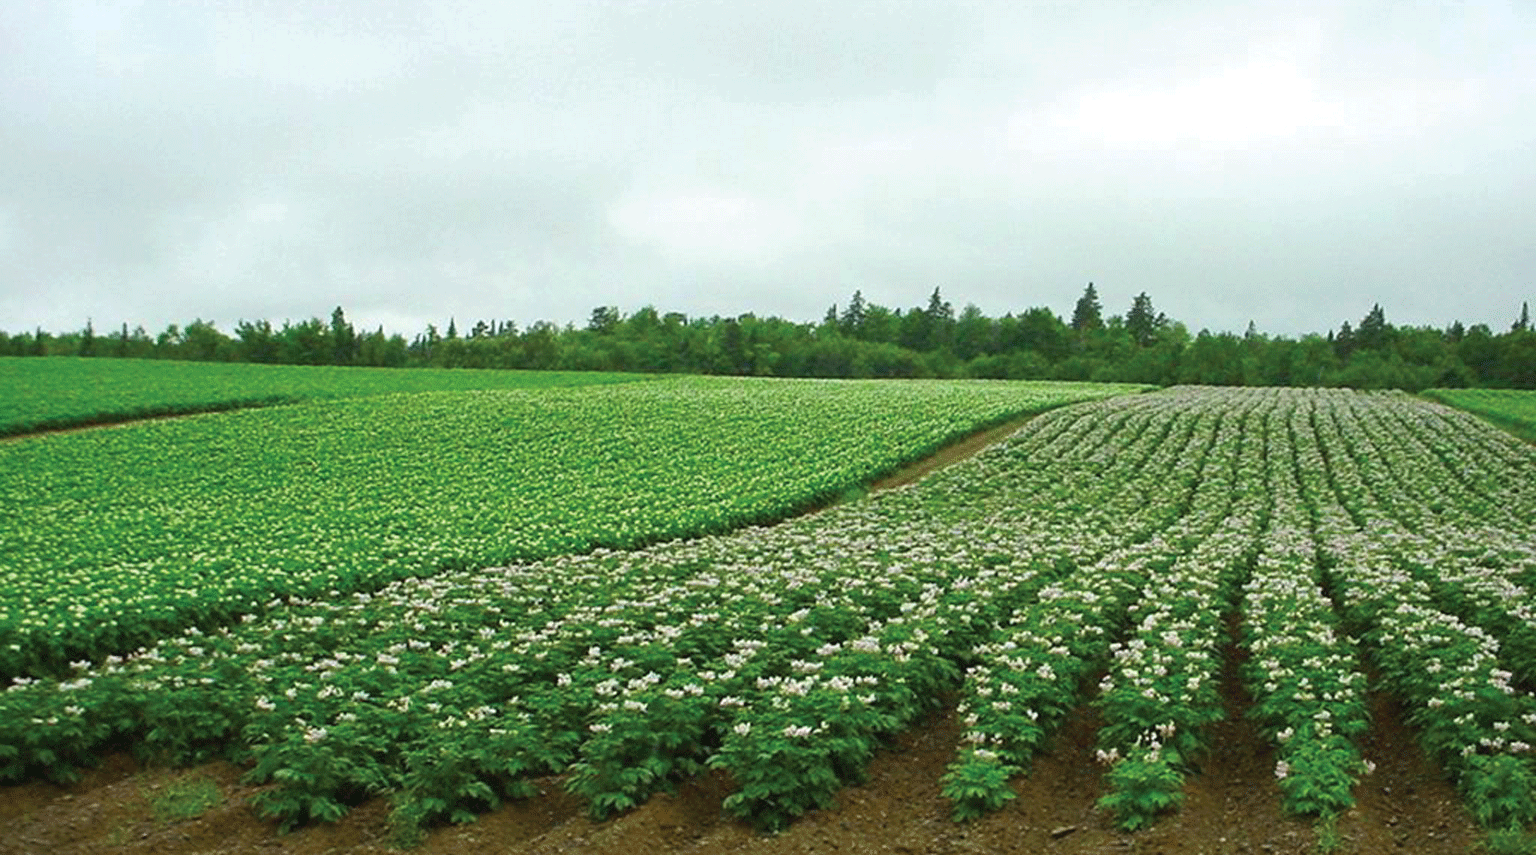 Photograph showing a farm field in Maine.